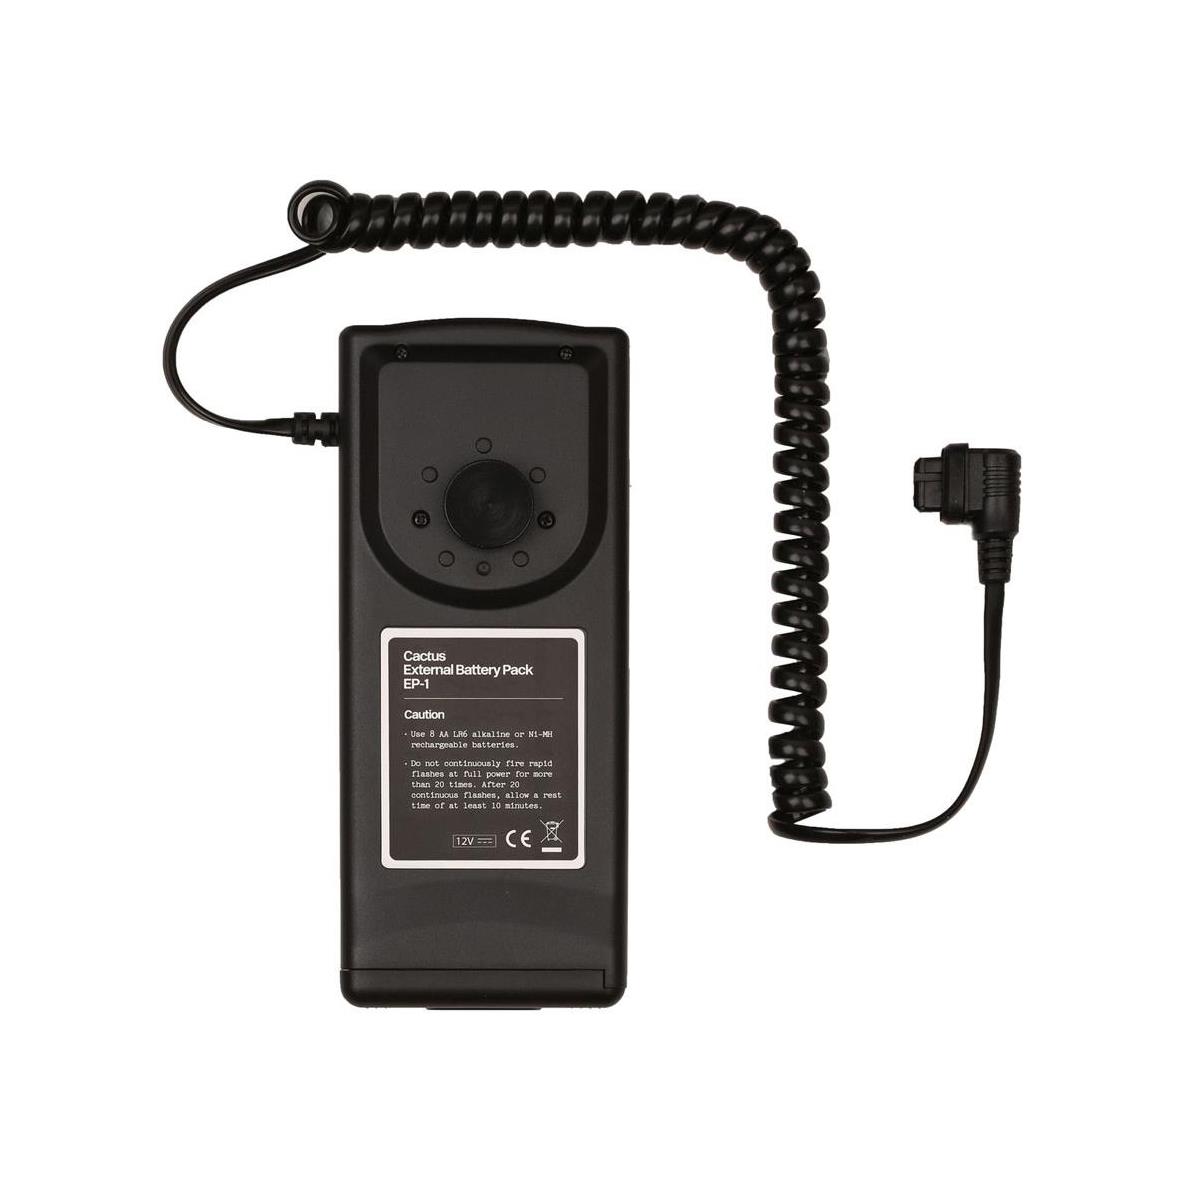 Image of Cactus EP-1 External Battery Pack for RF60 Wireless Flash